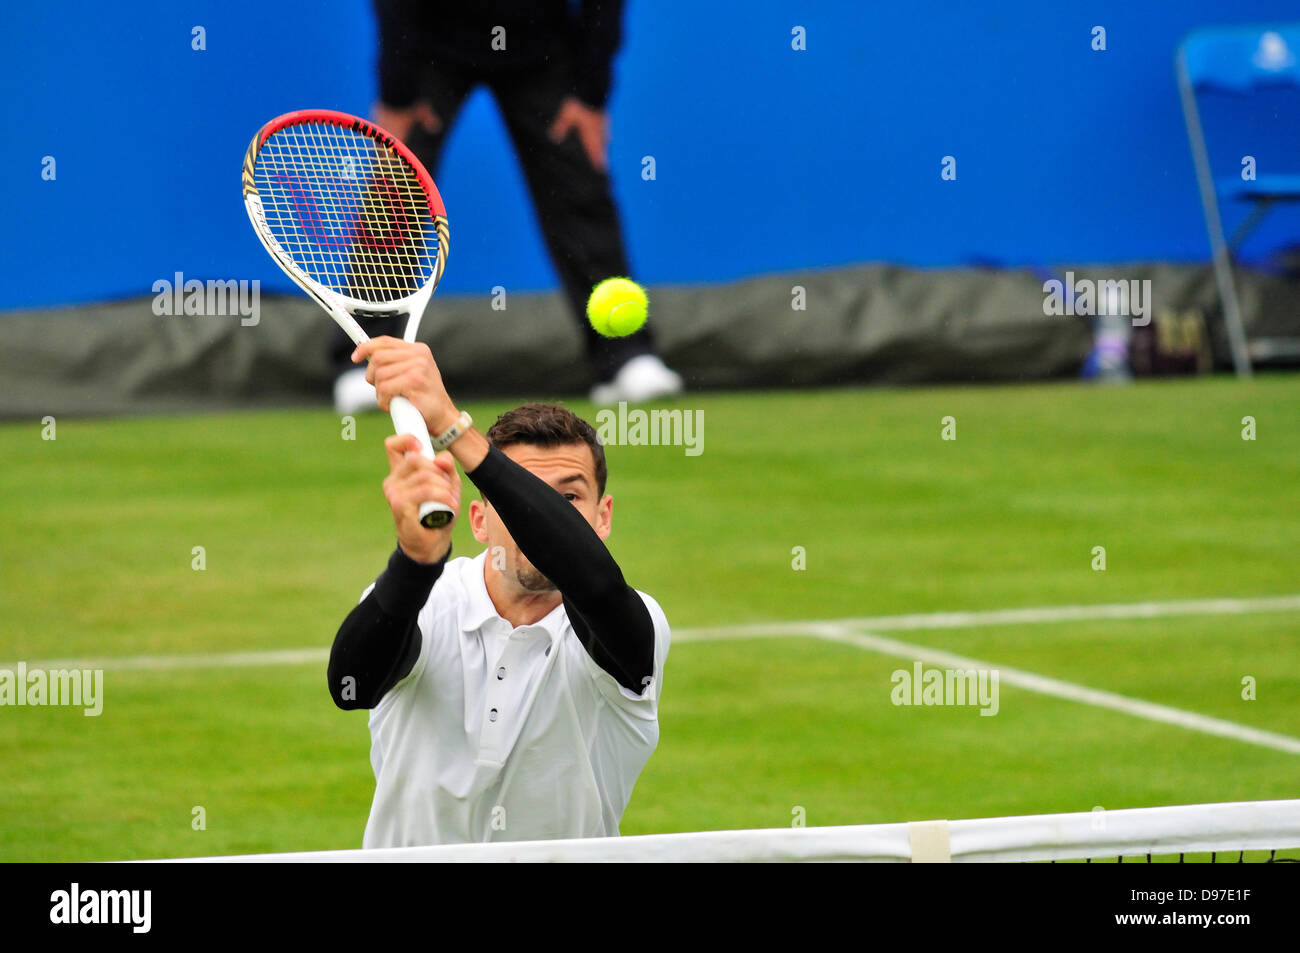 Grigor Dimitrov (Bulgaria) at the Aegon Tennis Championship, Queens Club, London. 12th June 2013 playing an unconventional overhead shot near the net Stock Photo